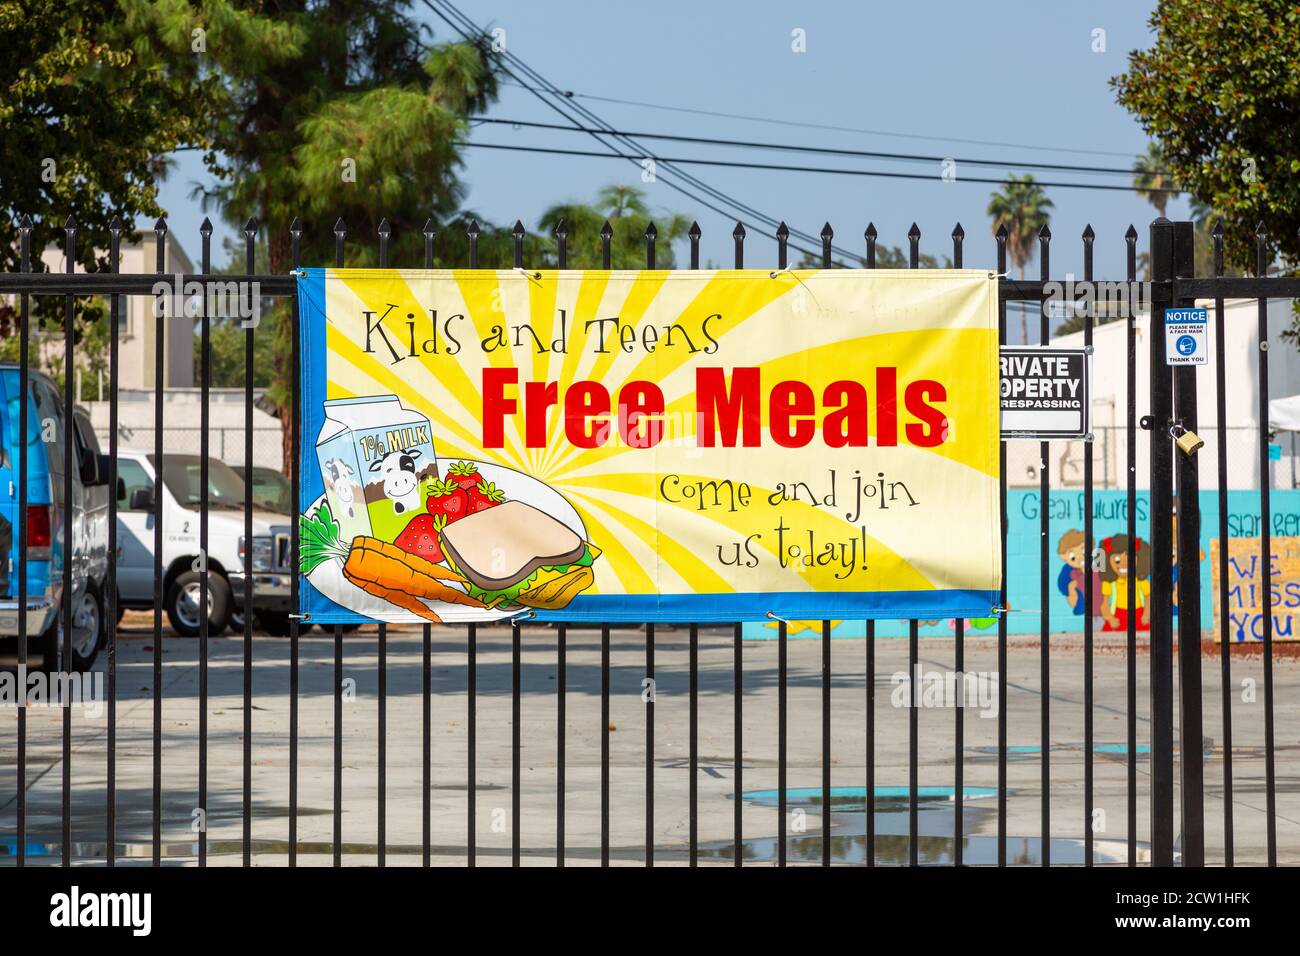 Free meals for kids and teens sign at the Boys and Girls Club of the West Valley, Canoga Park, California Stock Photo